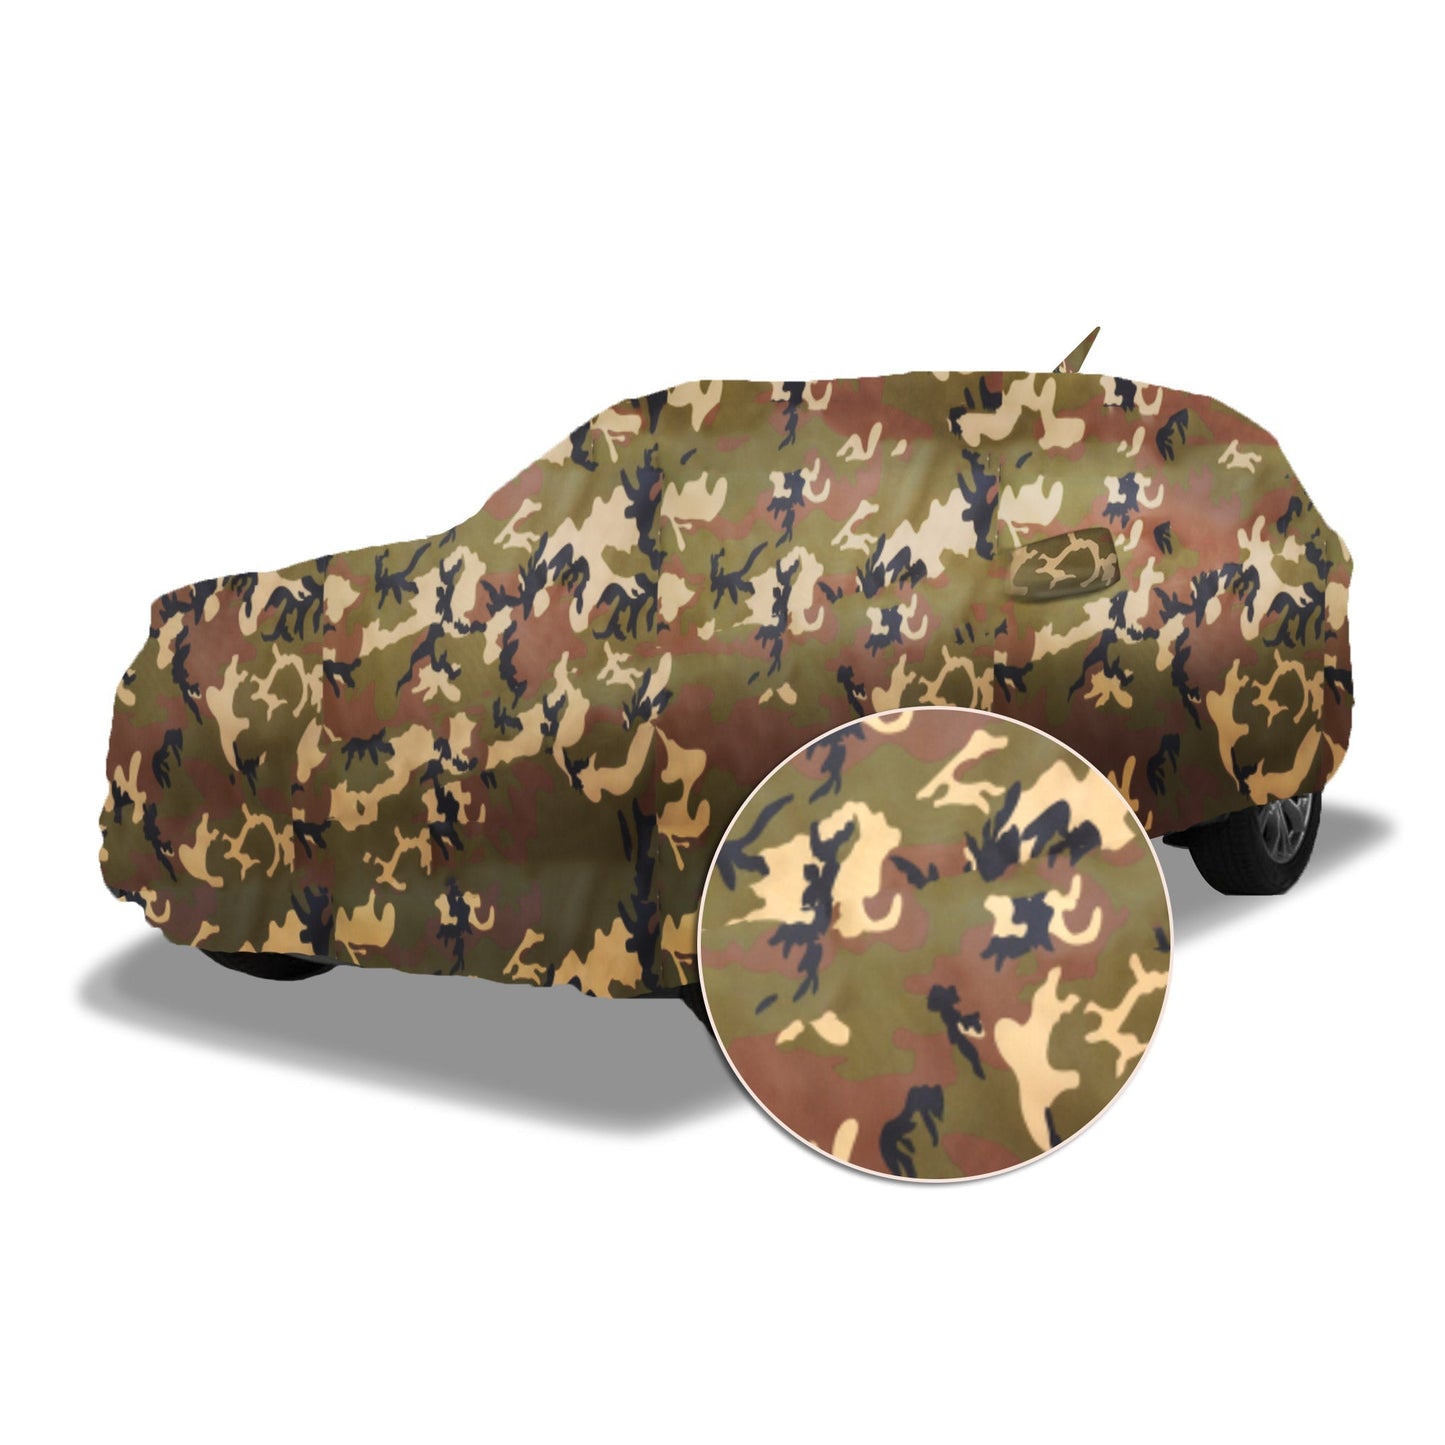 Ascot Kia Sonet AE Car Body Cover Extra Strong & Dust Proof Jungle Military Car Cover with UV Proof & Water-Resistant Coating